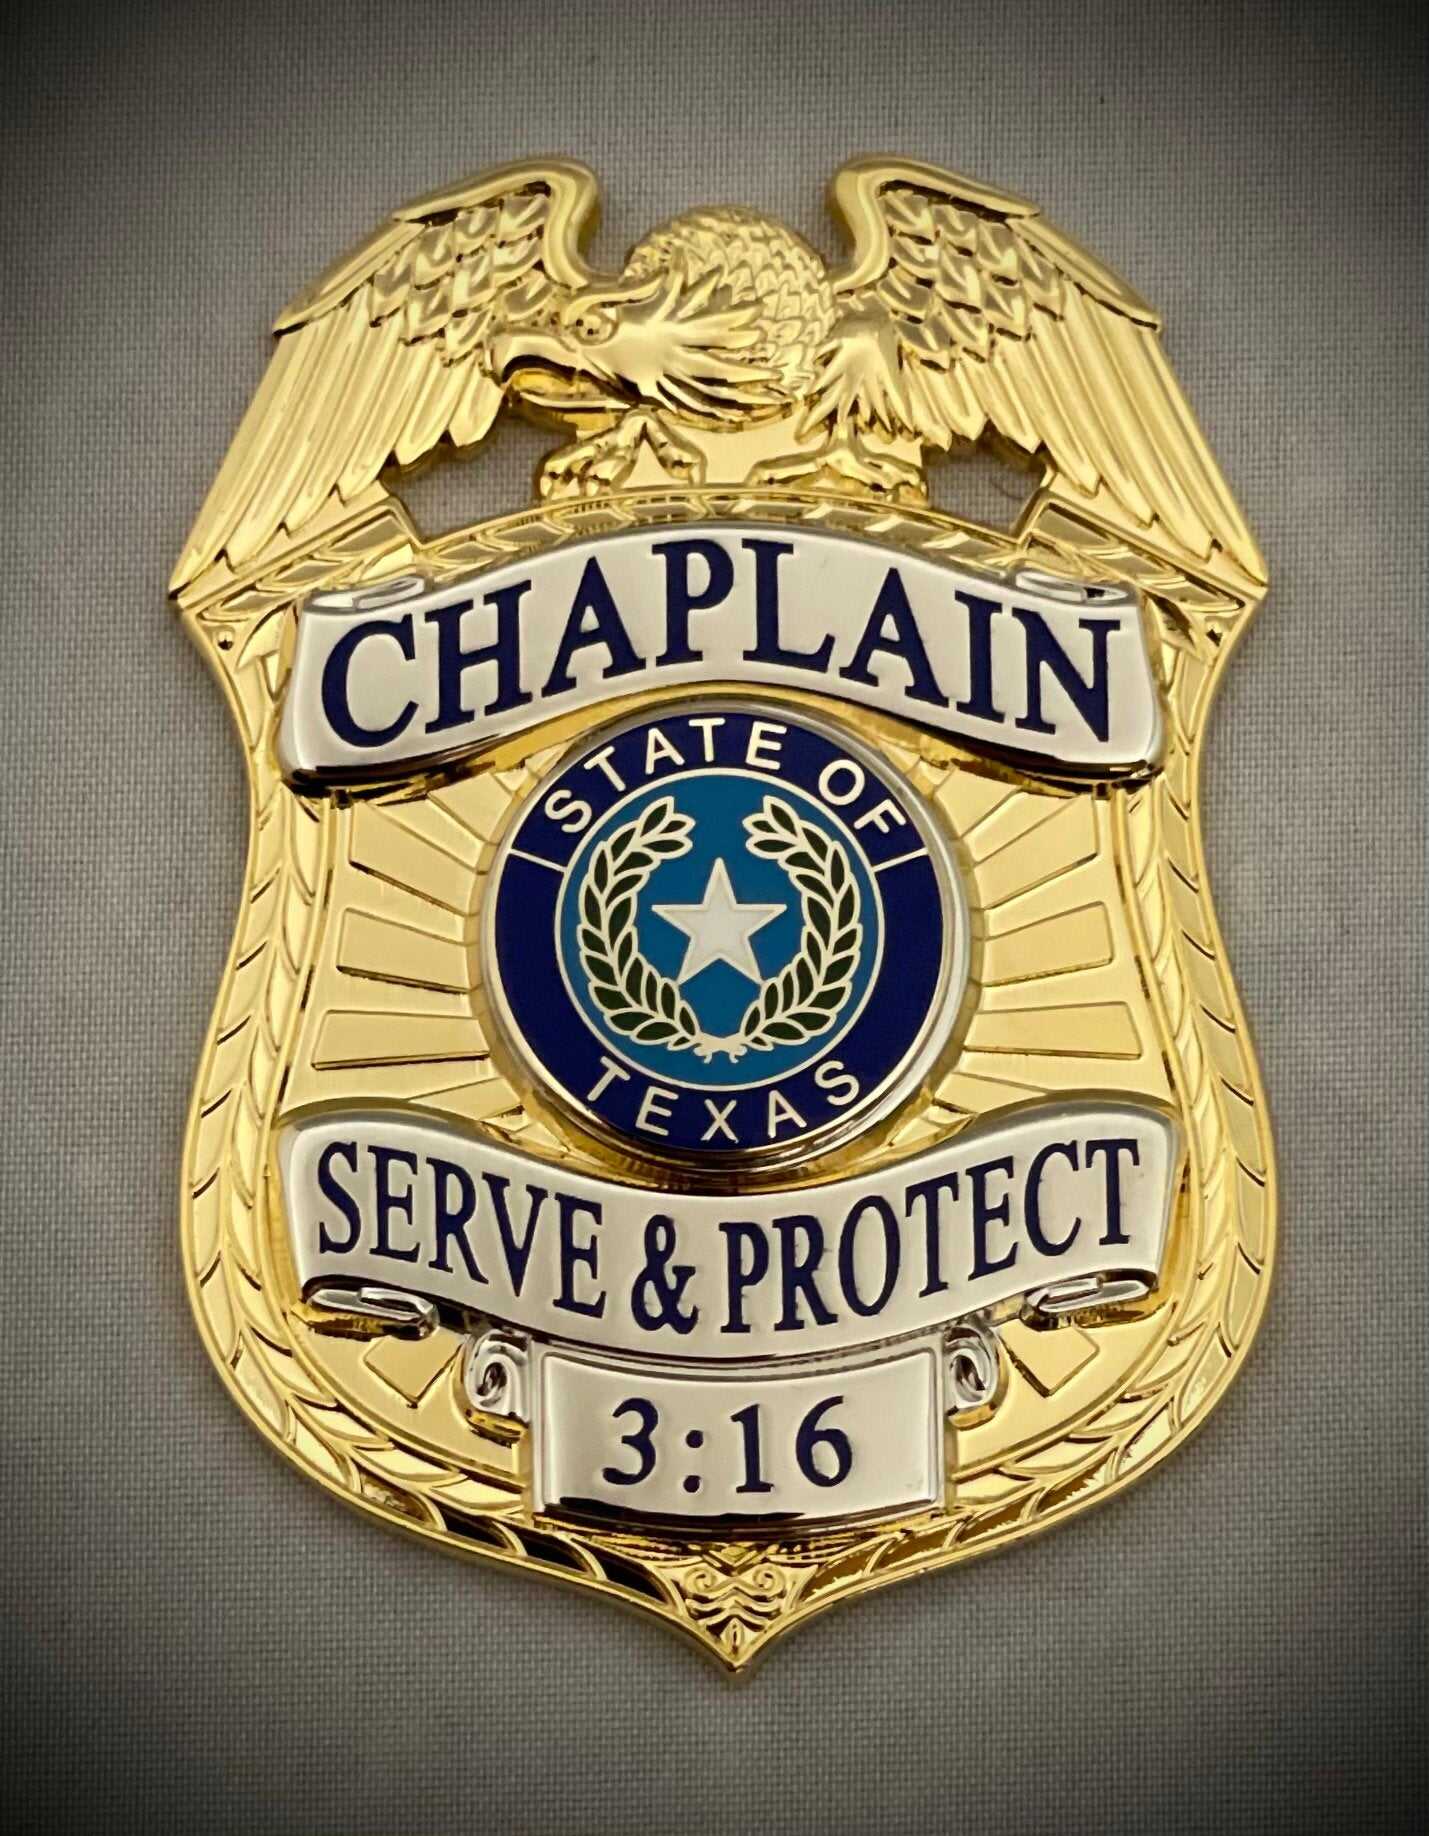 Chaplain Serve and Protect Gold Two-Tone Badge with Black leather belt clip holder